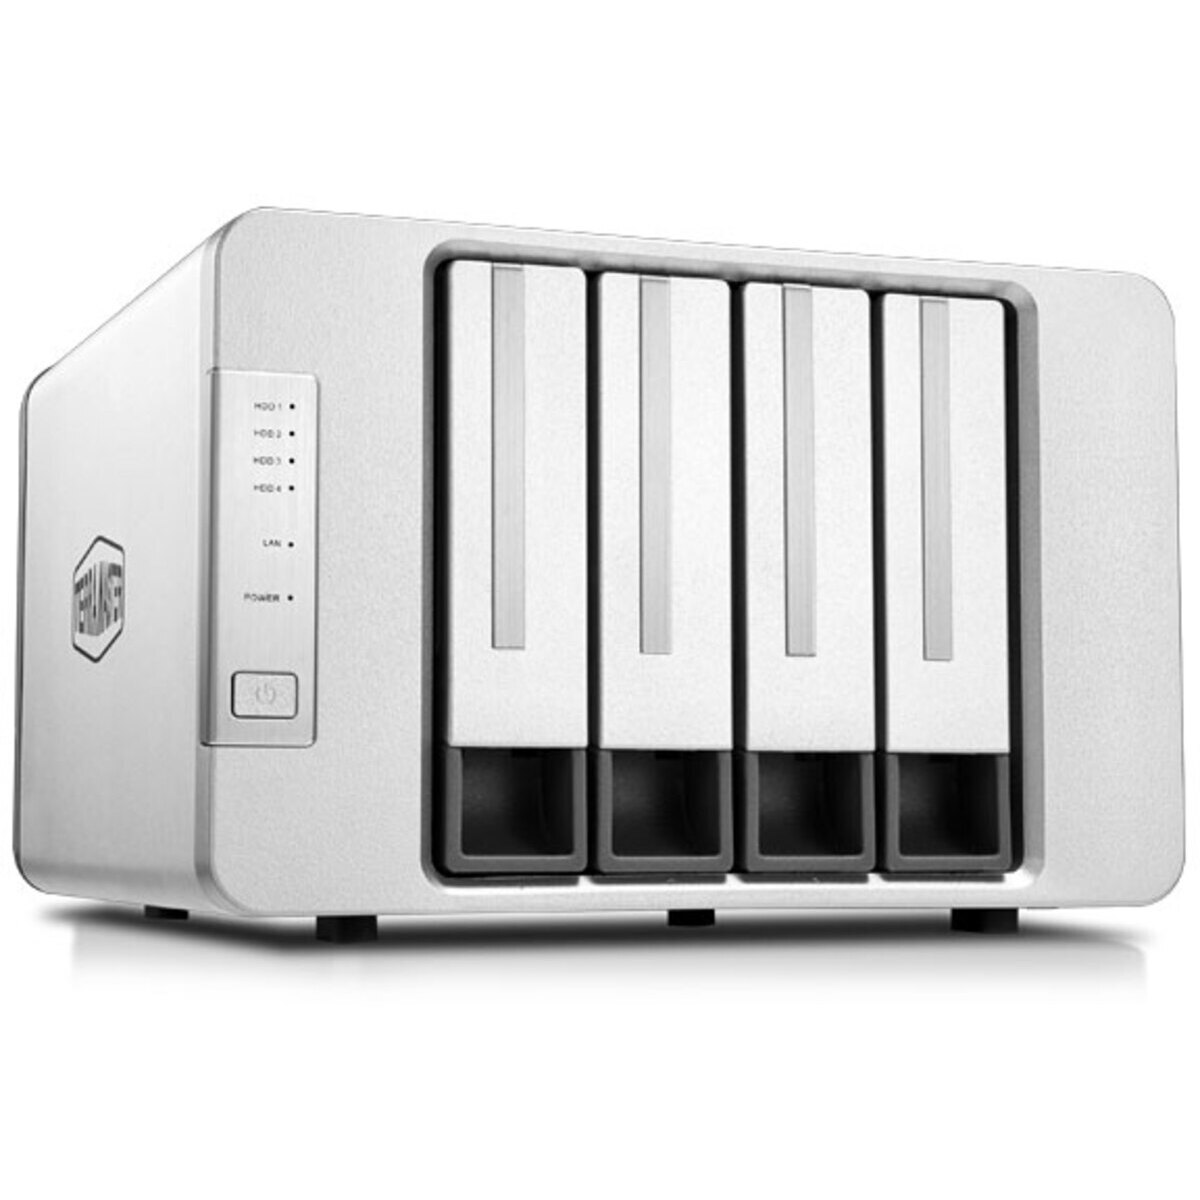 TerraMaster F4-223 6tb 4-Bay Desktop Personal / Basic Home / Small Office NAS - Network Attached Storage Device 3x2tb Seagate BarraCuda ST2000DM008 3.5 7200rpm SATA 6Gb/s HDD CONSUMER Class Drives Installed - Burn-In Tested - FREE RAM UPGRADE F4-223